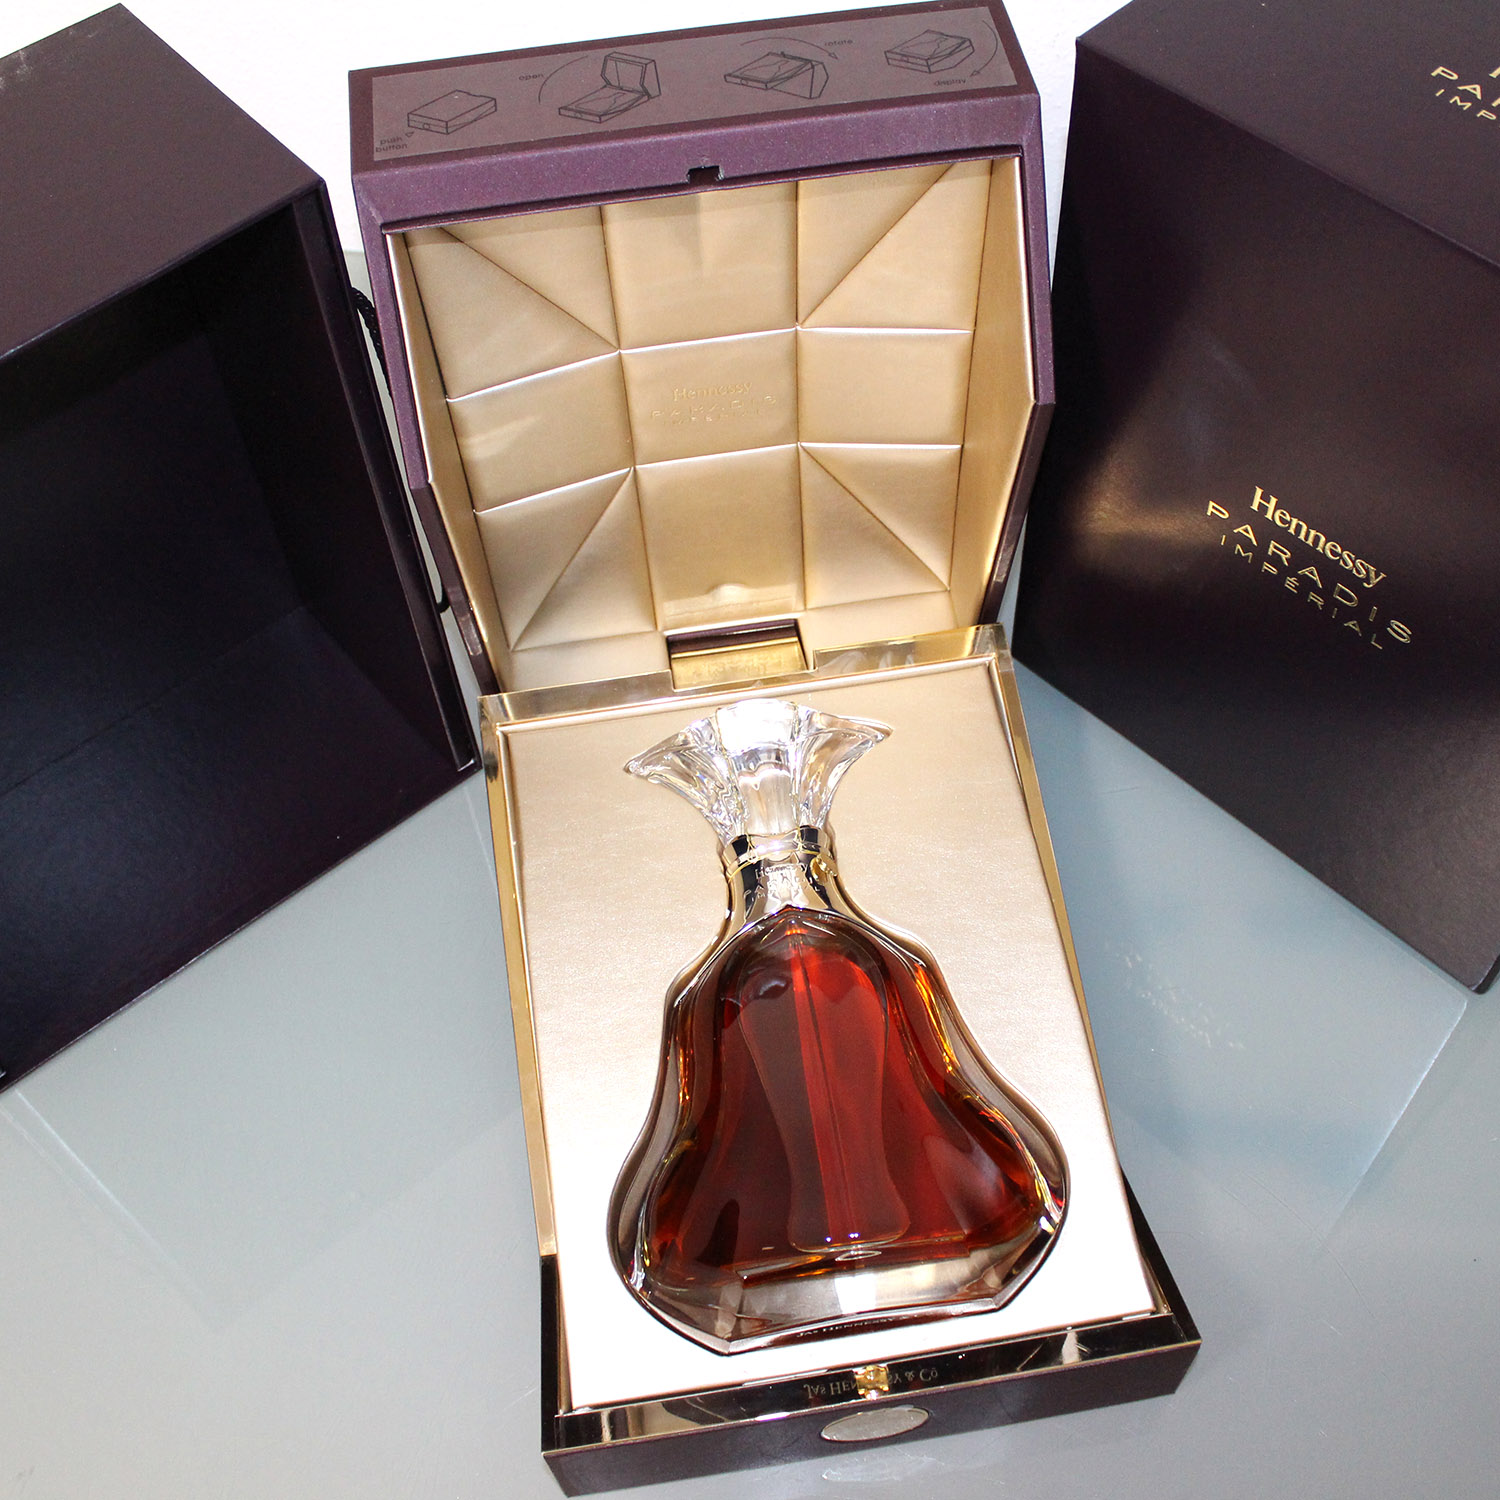 Hennessy Paradis Imperial Cognac - Buy Online at